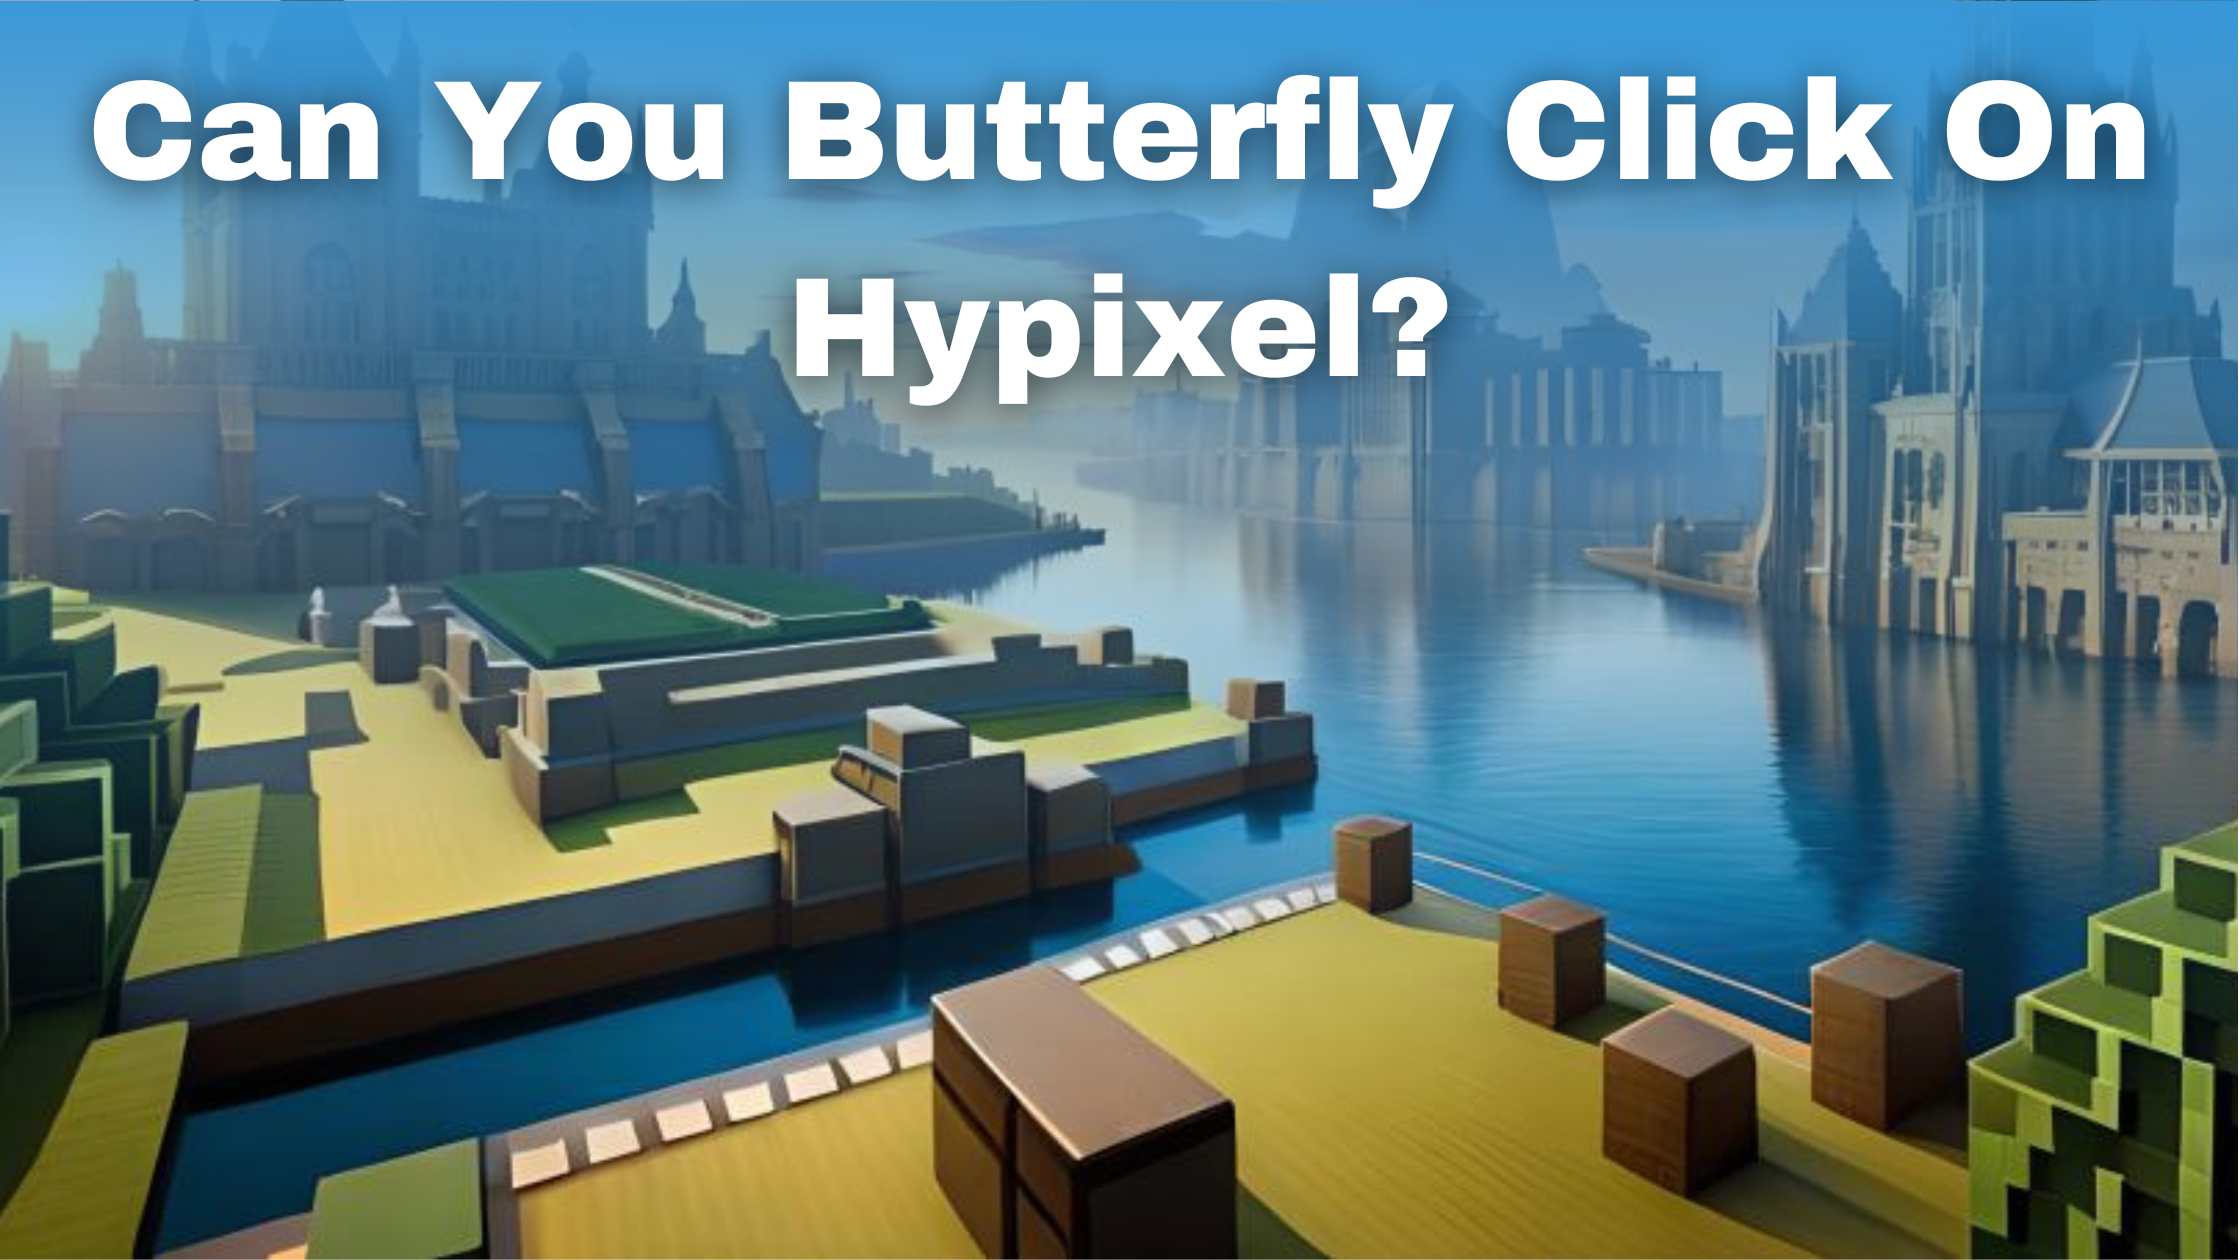 Discover If You Can Butterfly Click On Hypixel